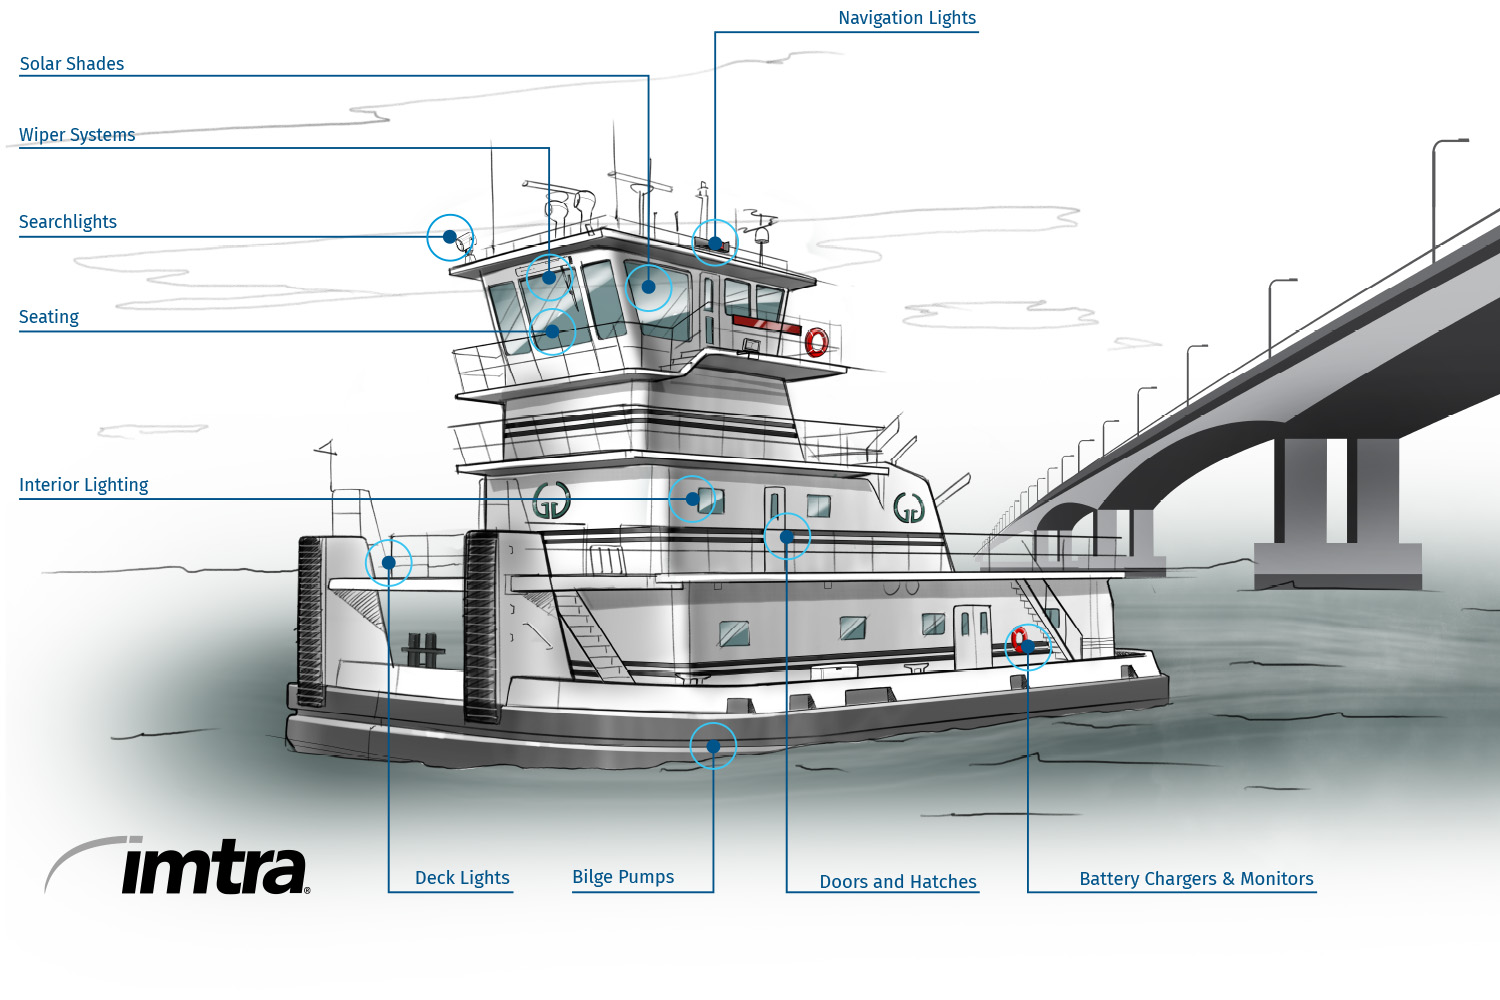 Imtra's Systems & Solutions for Inland Towboats